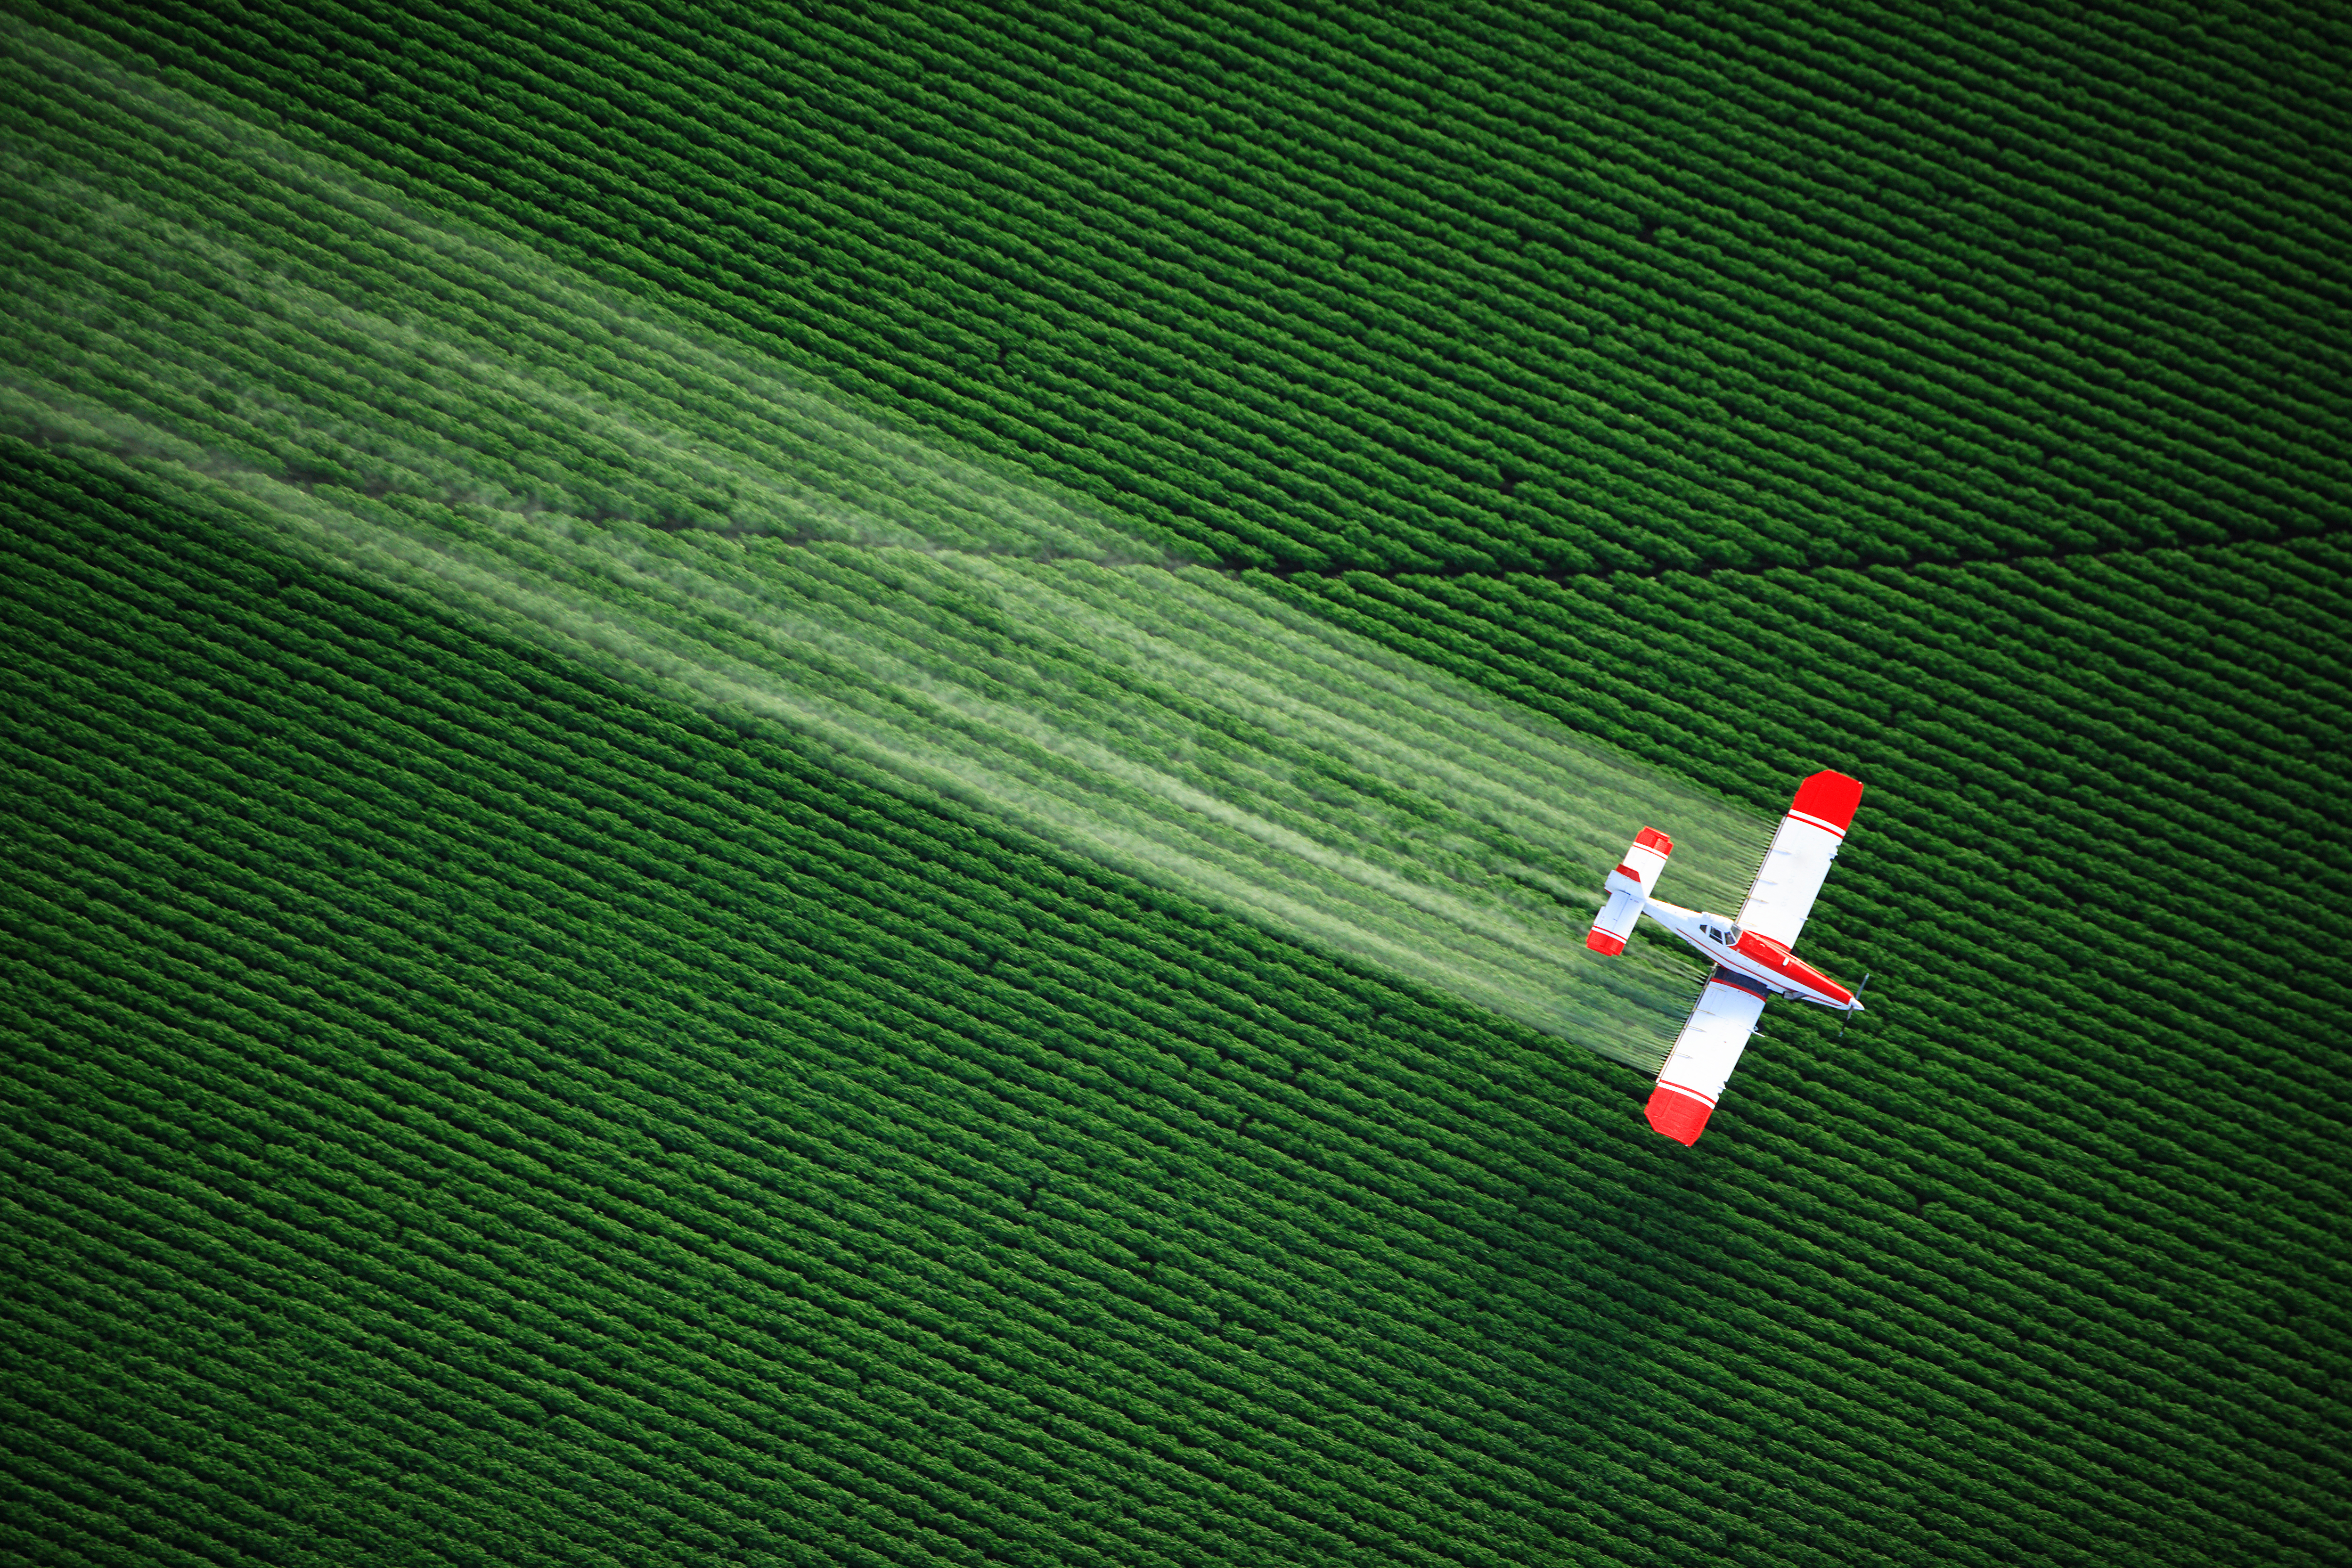 Pesticides and their links to cancer